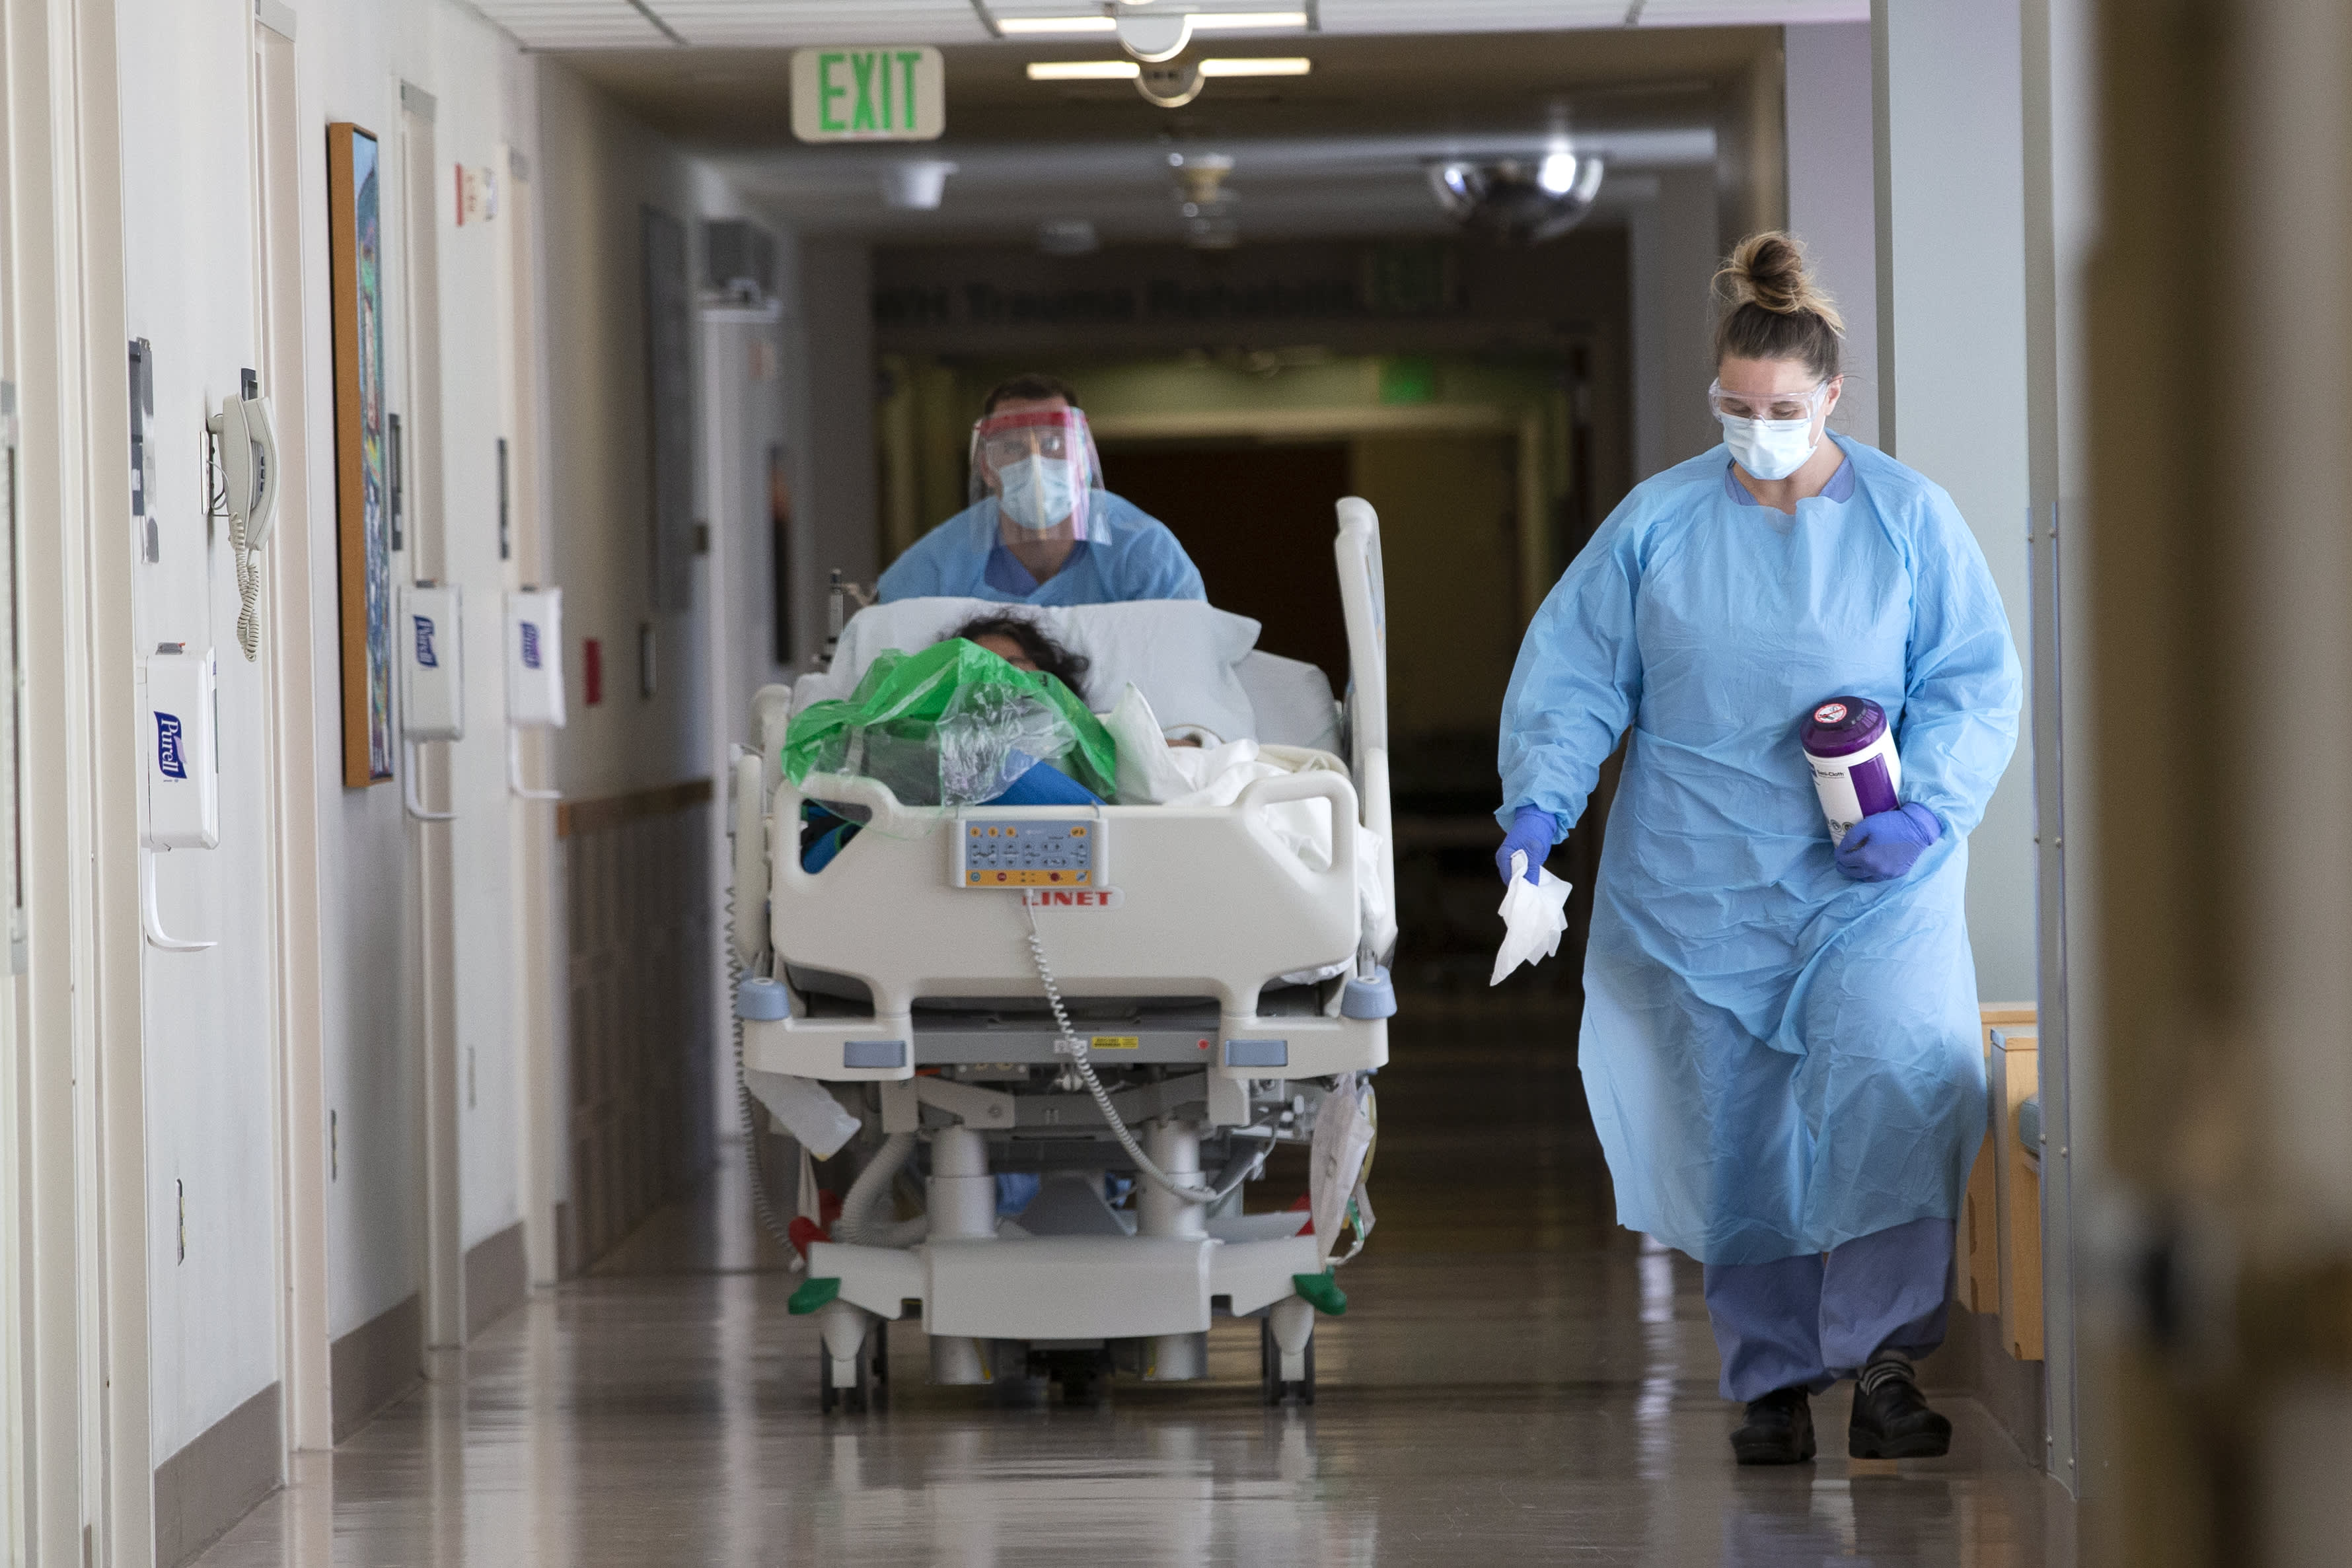 Washington state Covid transmissions and hospitalizations hit all-time high